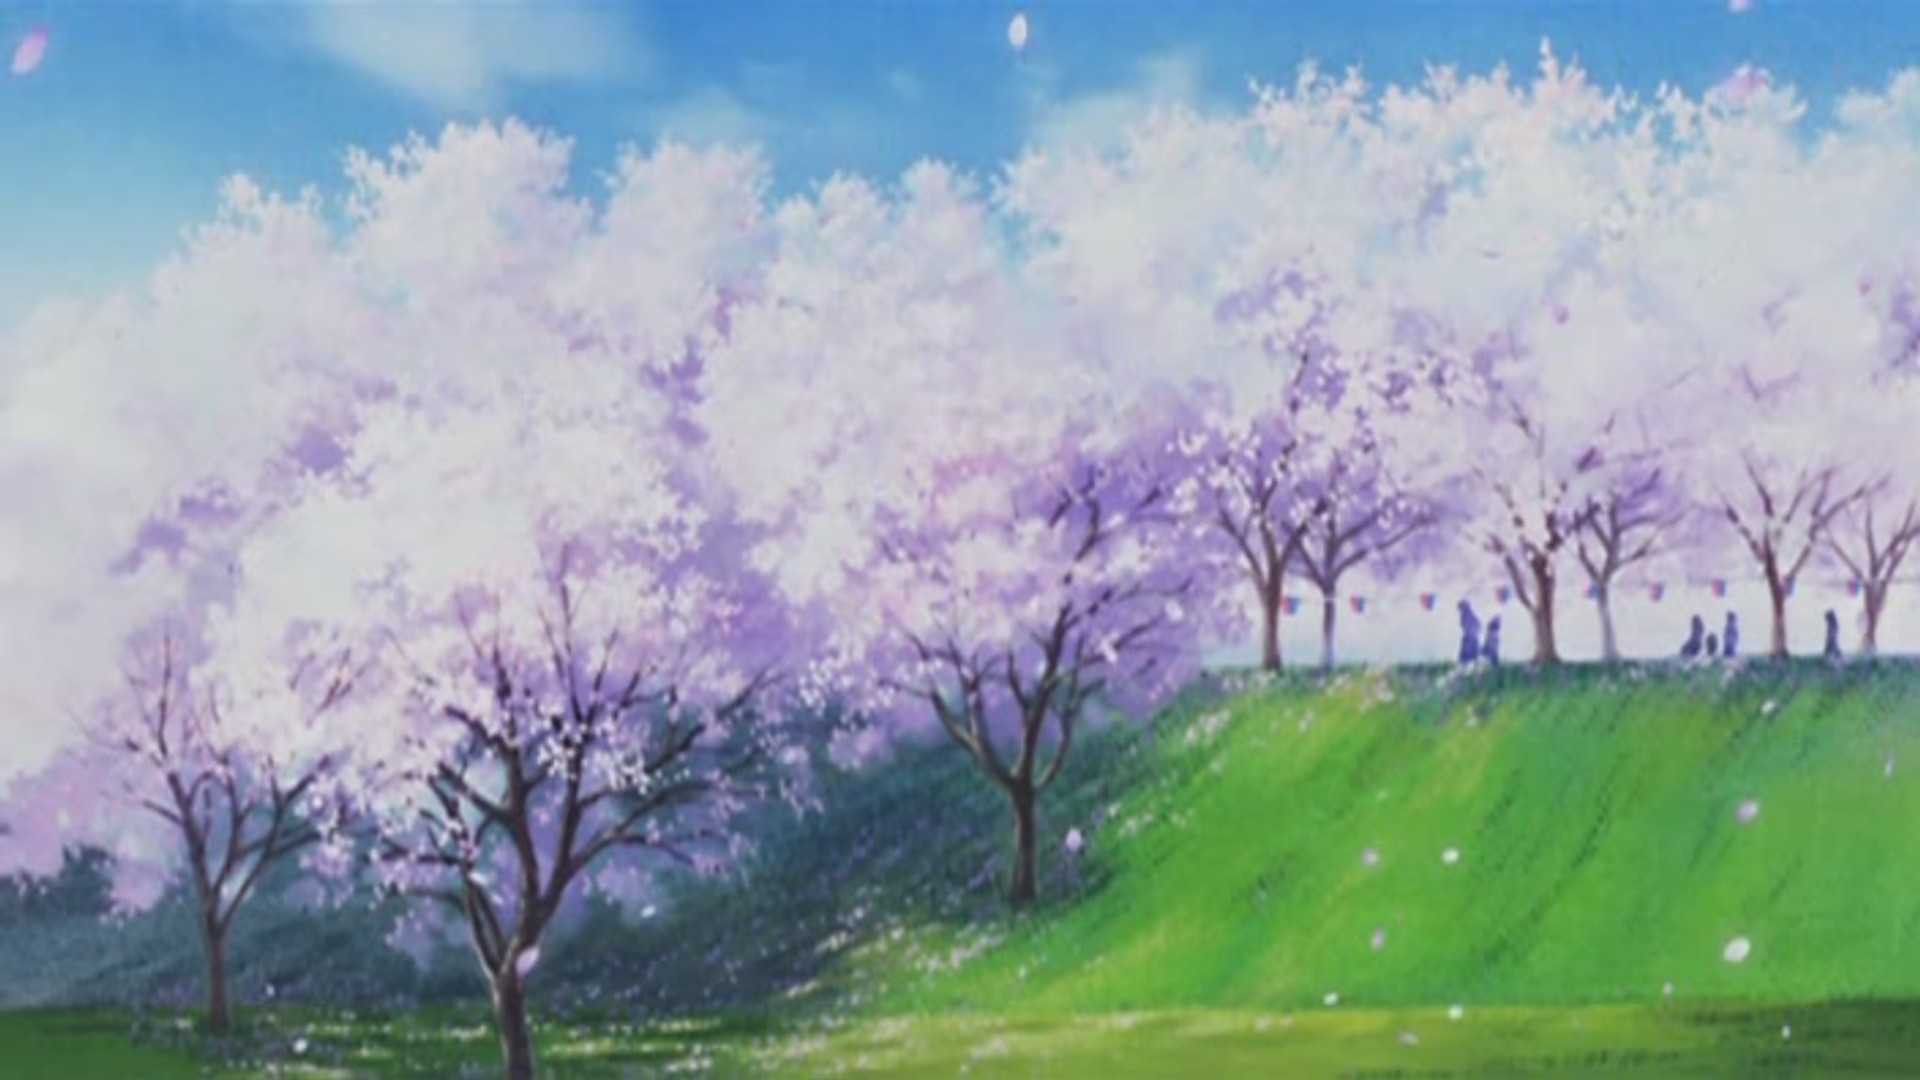 Anime Scenery HD Wallpapers and Backgrounds